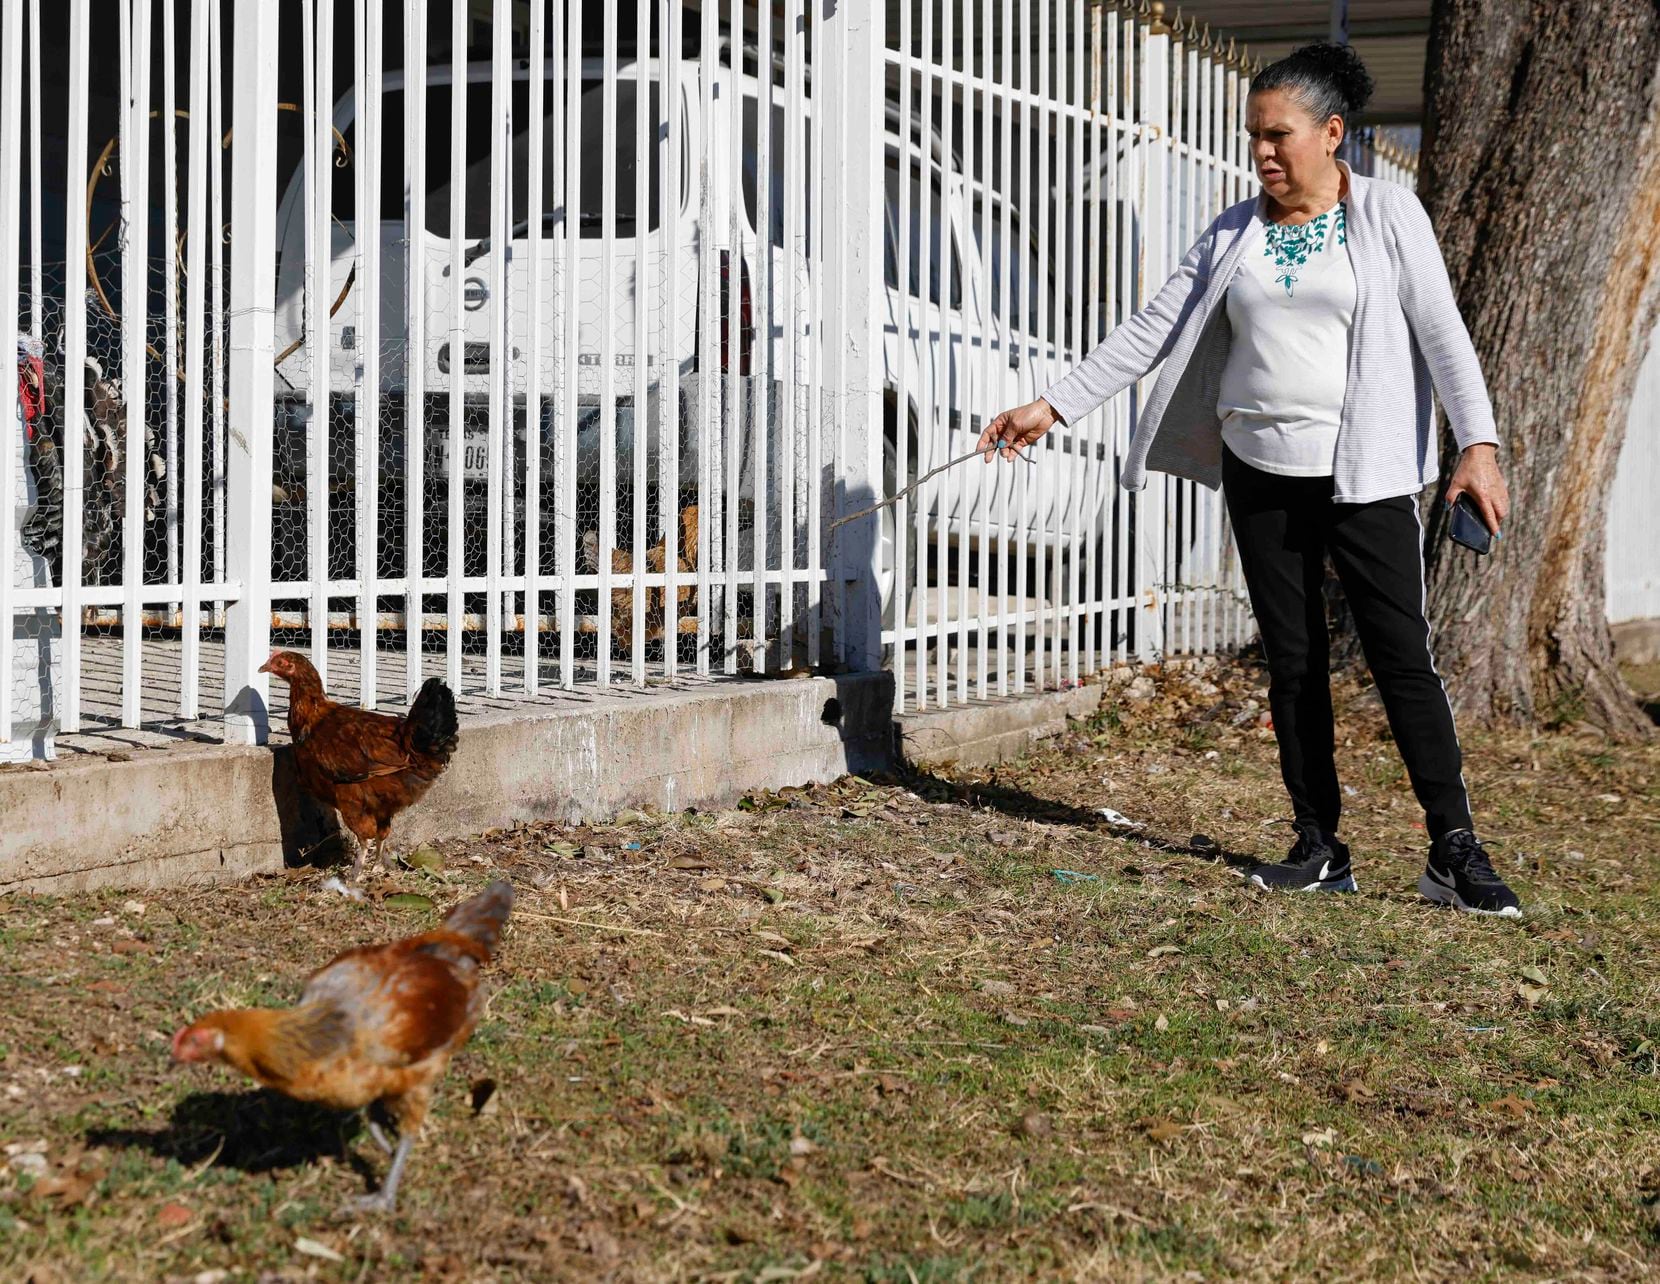 Maria Lopez, who lives near the Dallas Zoo, attends to her chickens roaming by her house on...